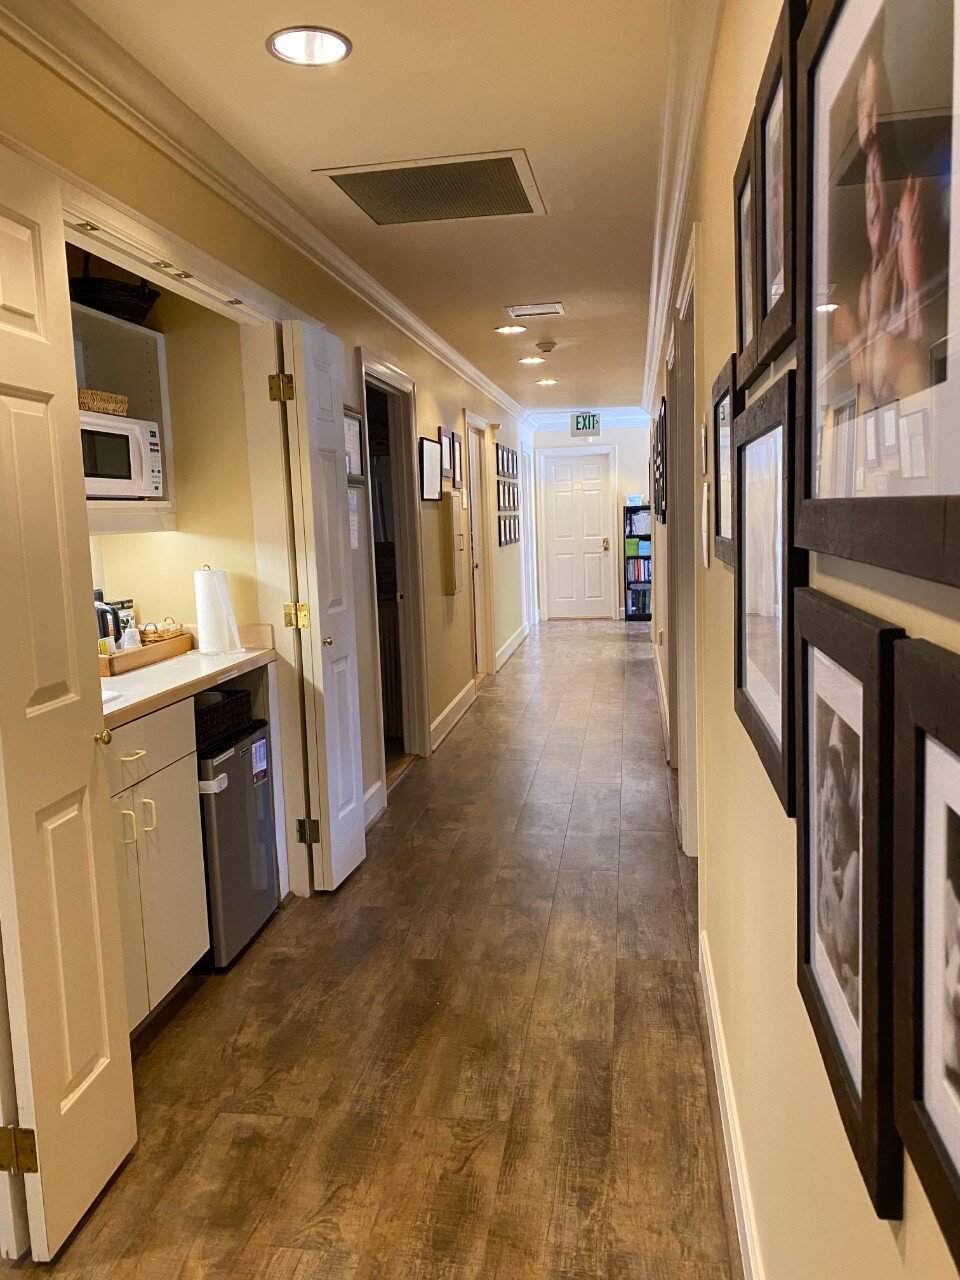 Hallway to Suites and Client Kitchenette